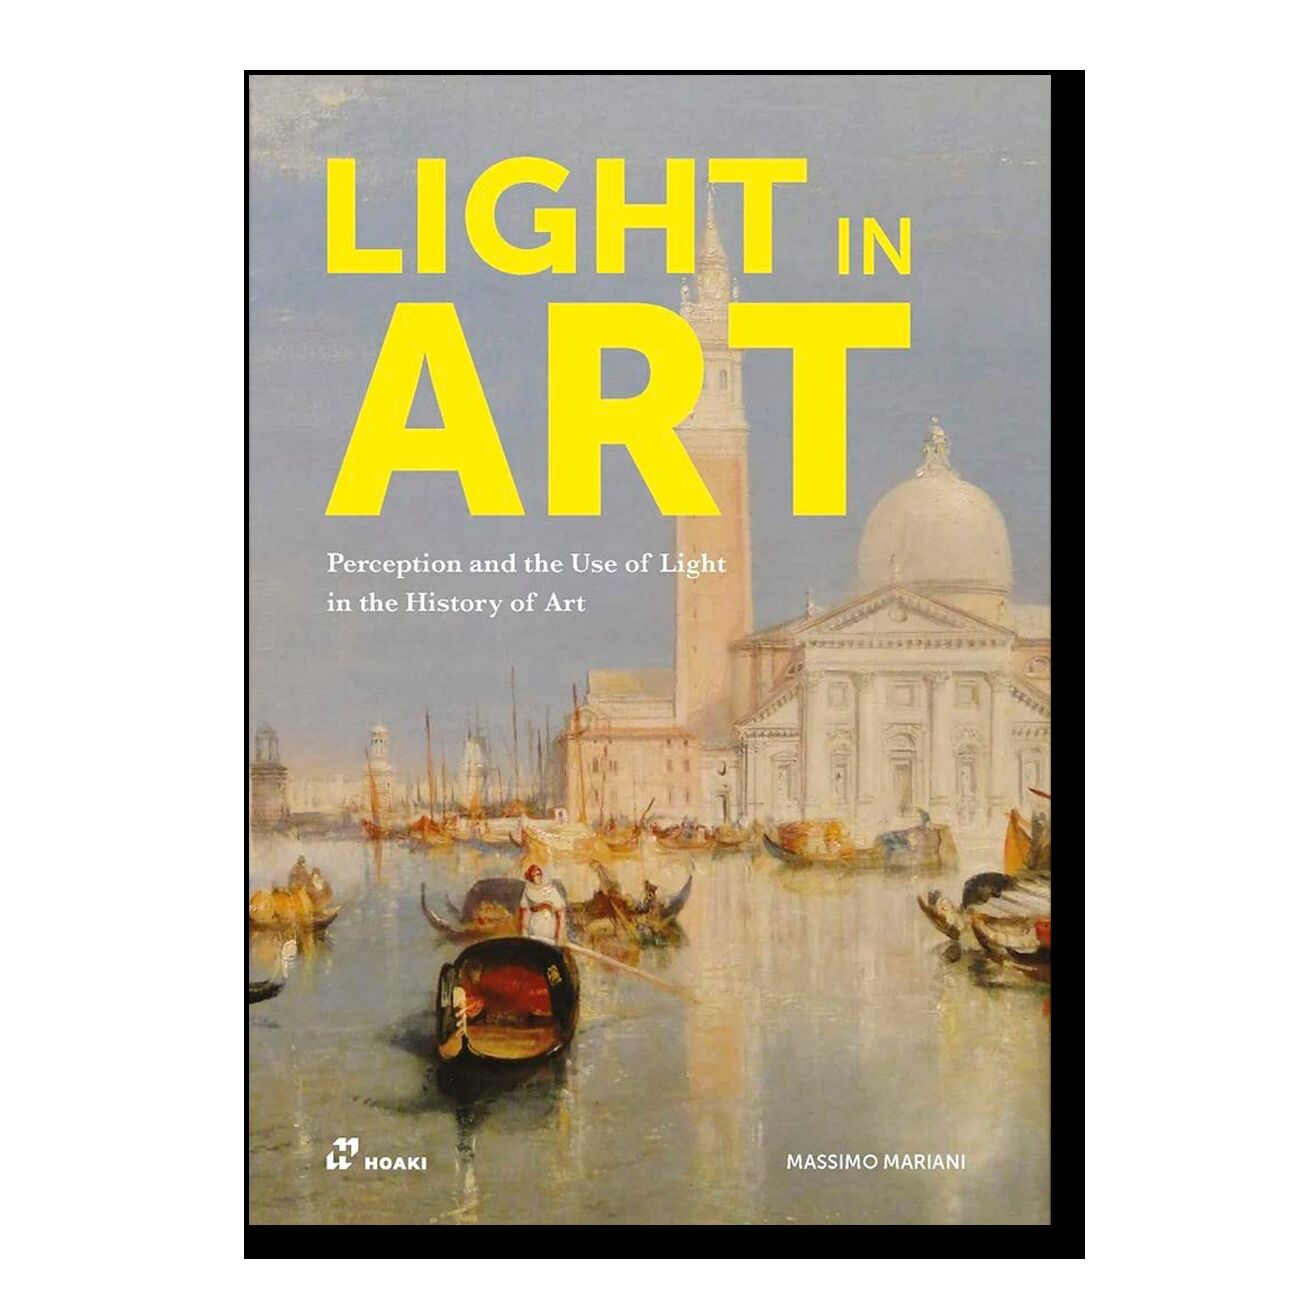 Light in Art: Perception and the Use of Light in the History of Art